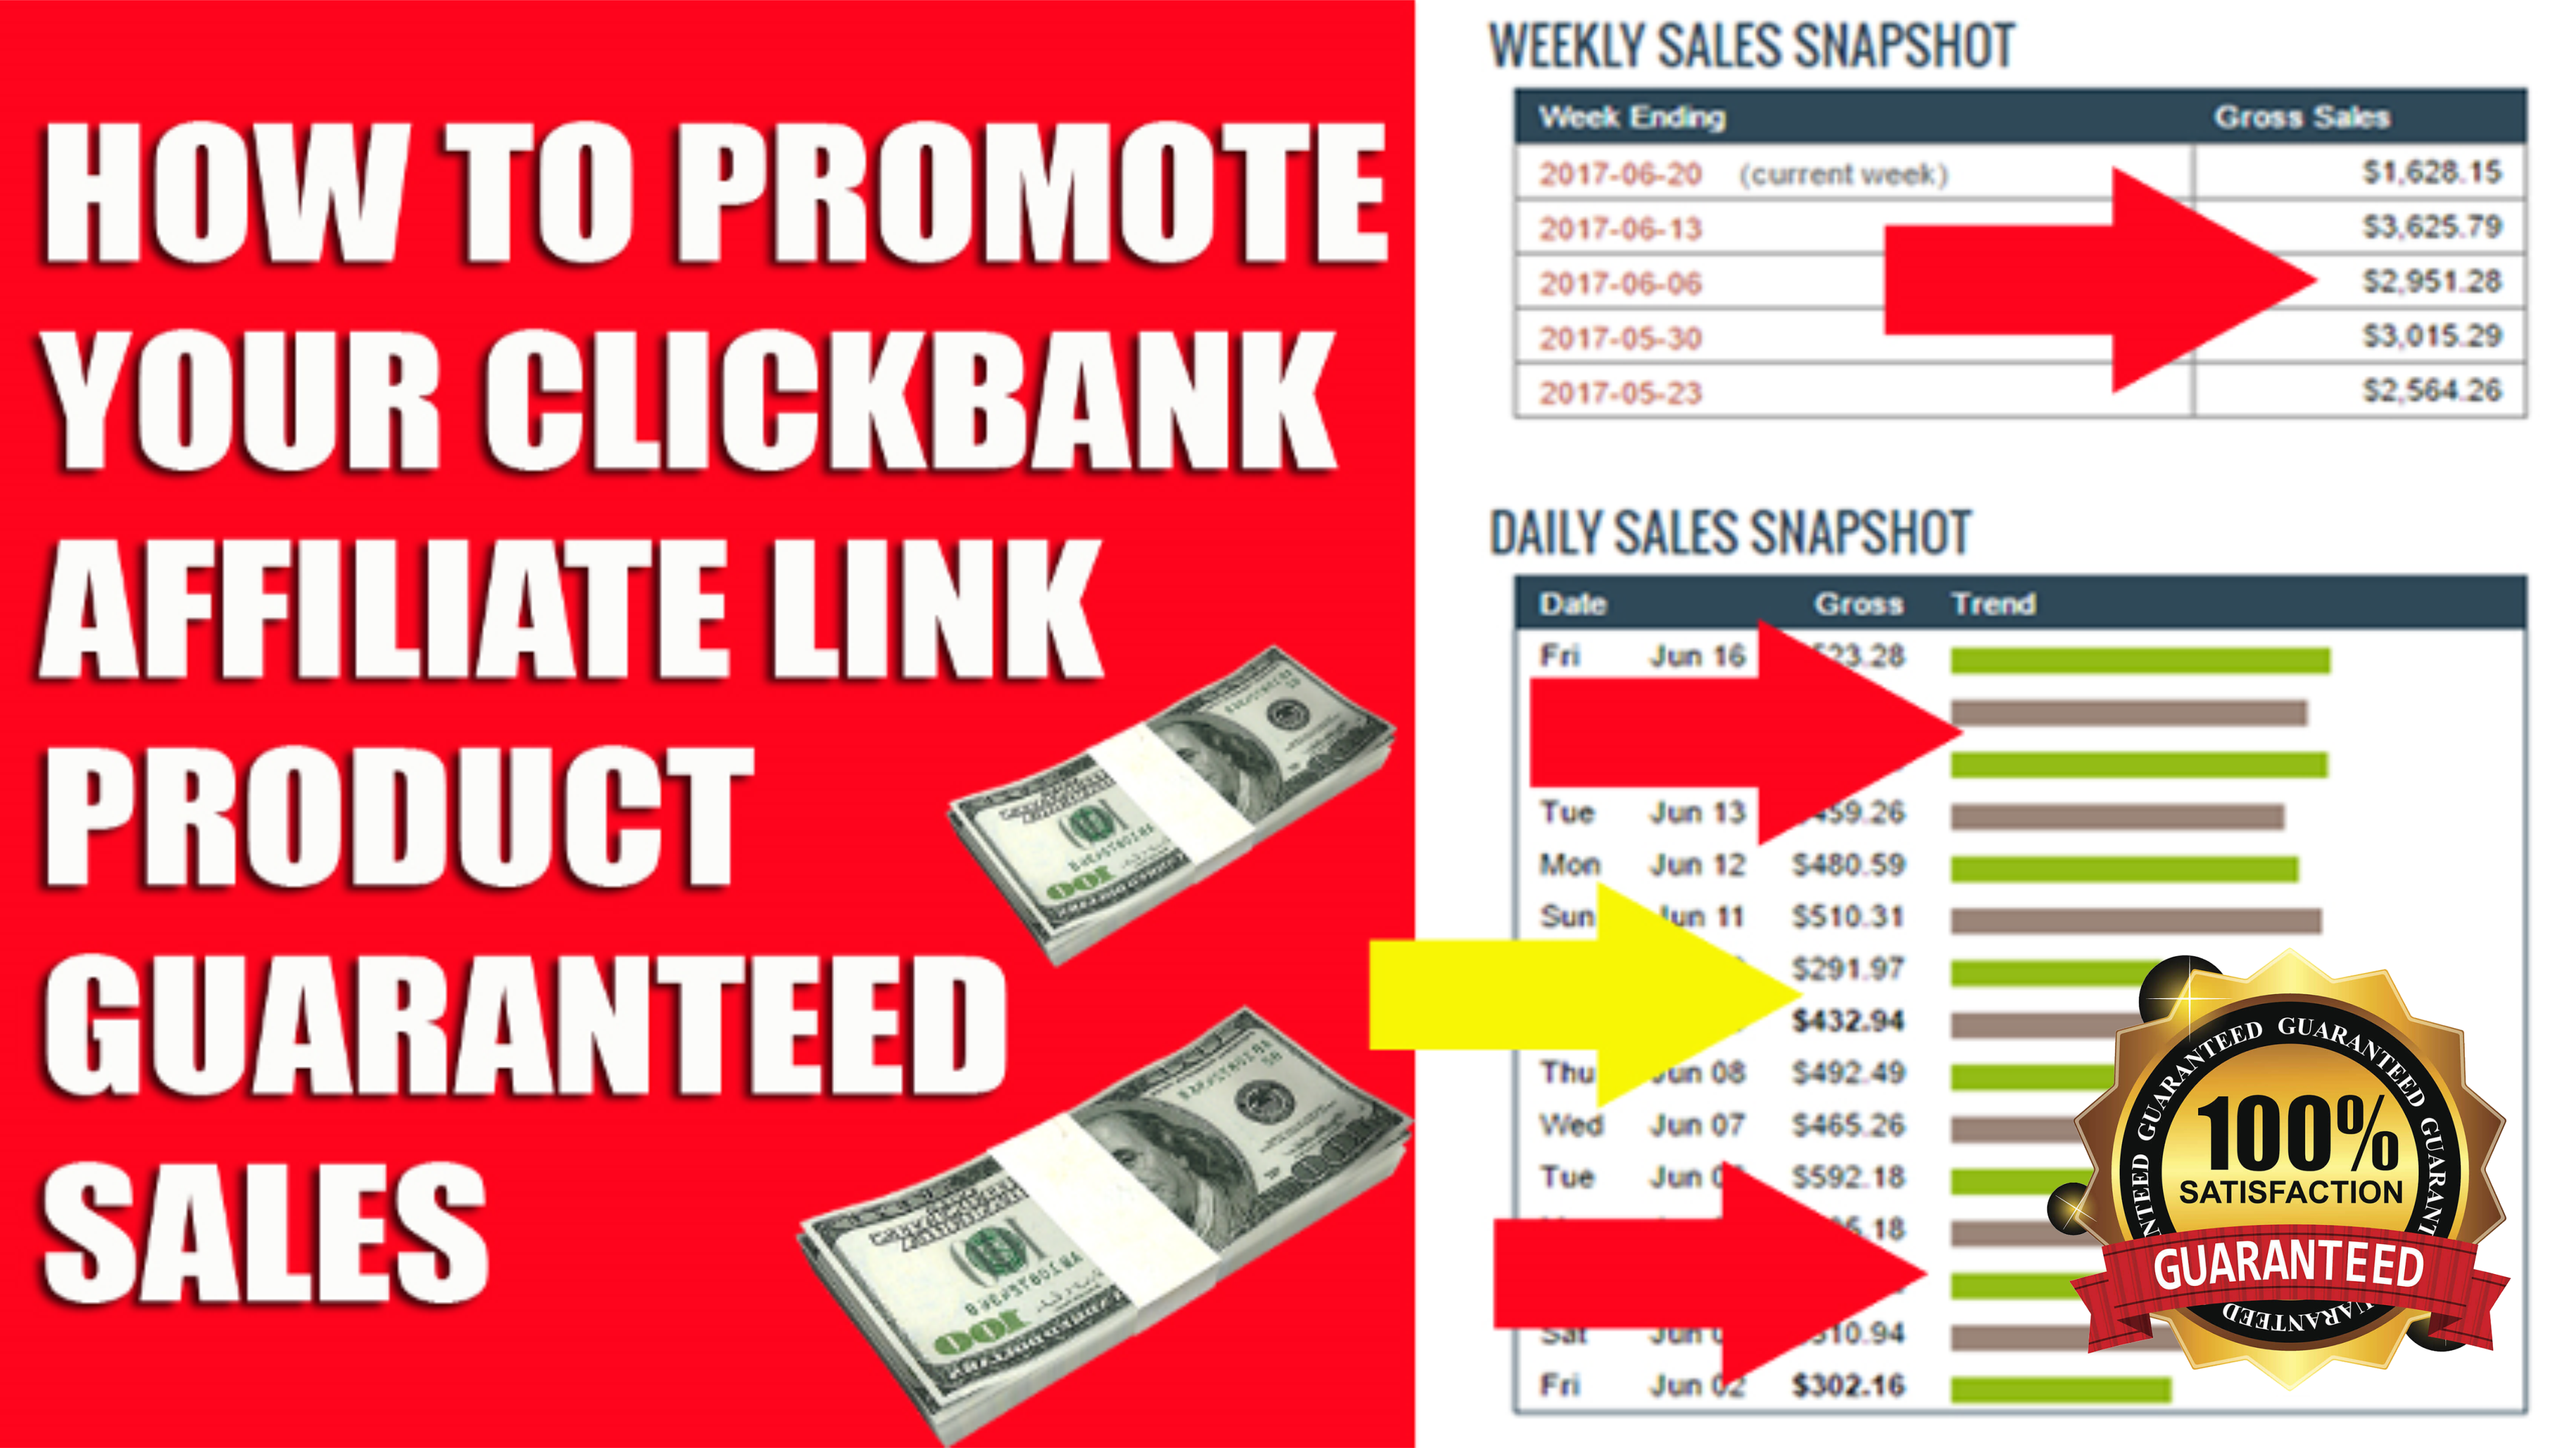 Give Top Best Source list To Promote Clickbank Product Sales Guarantee for $15 - SEOClerks